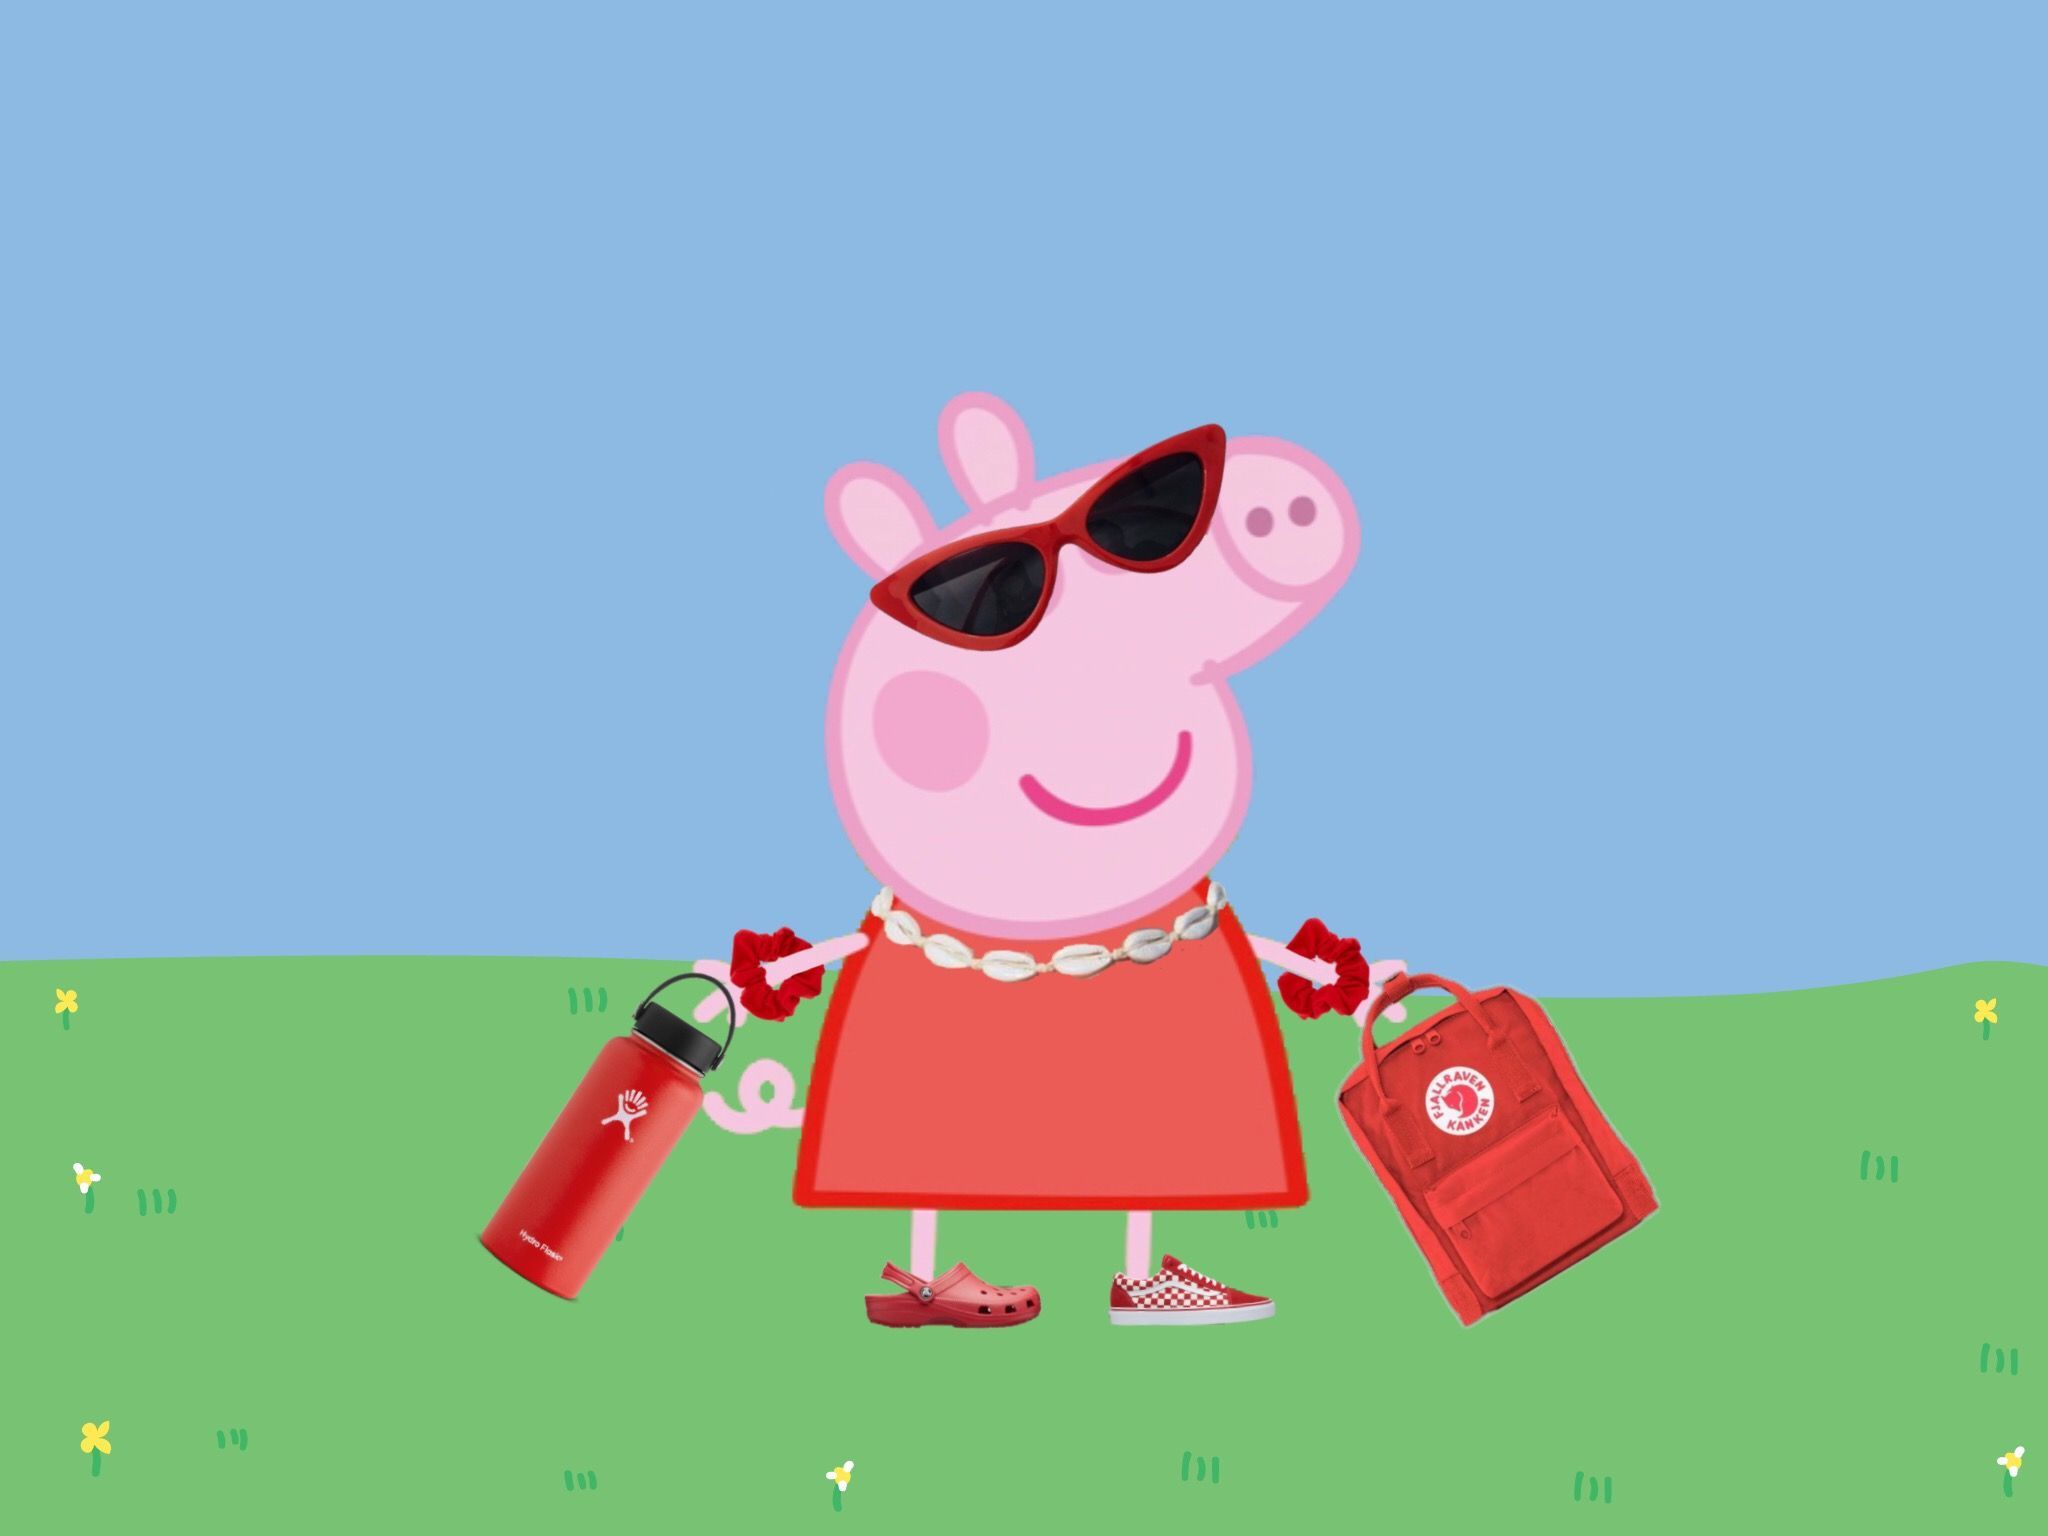 Peppa Pig Wallpaper What Are You Doing On My PhoneD Wallpaper. Peppa pig wallpaper, Peppa pig funny, Pig wallpaper